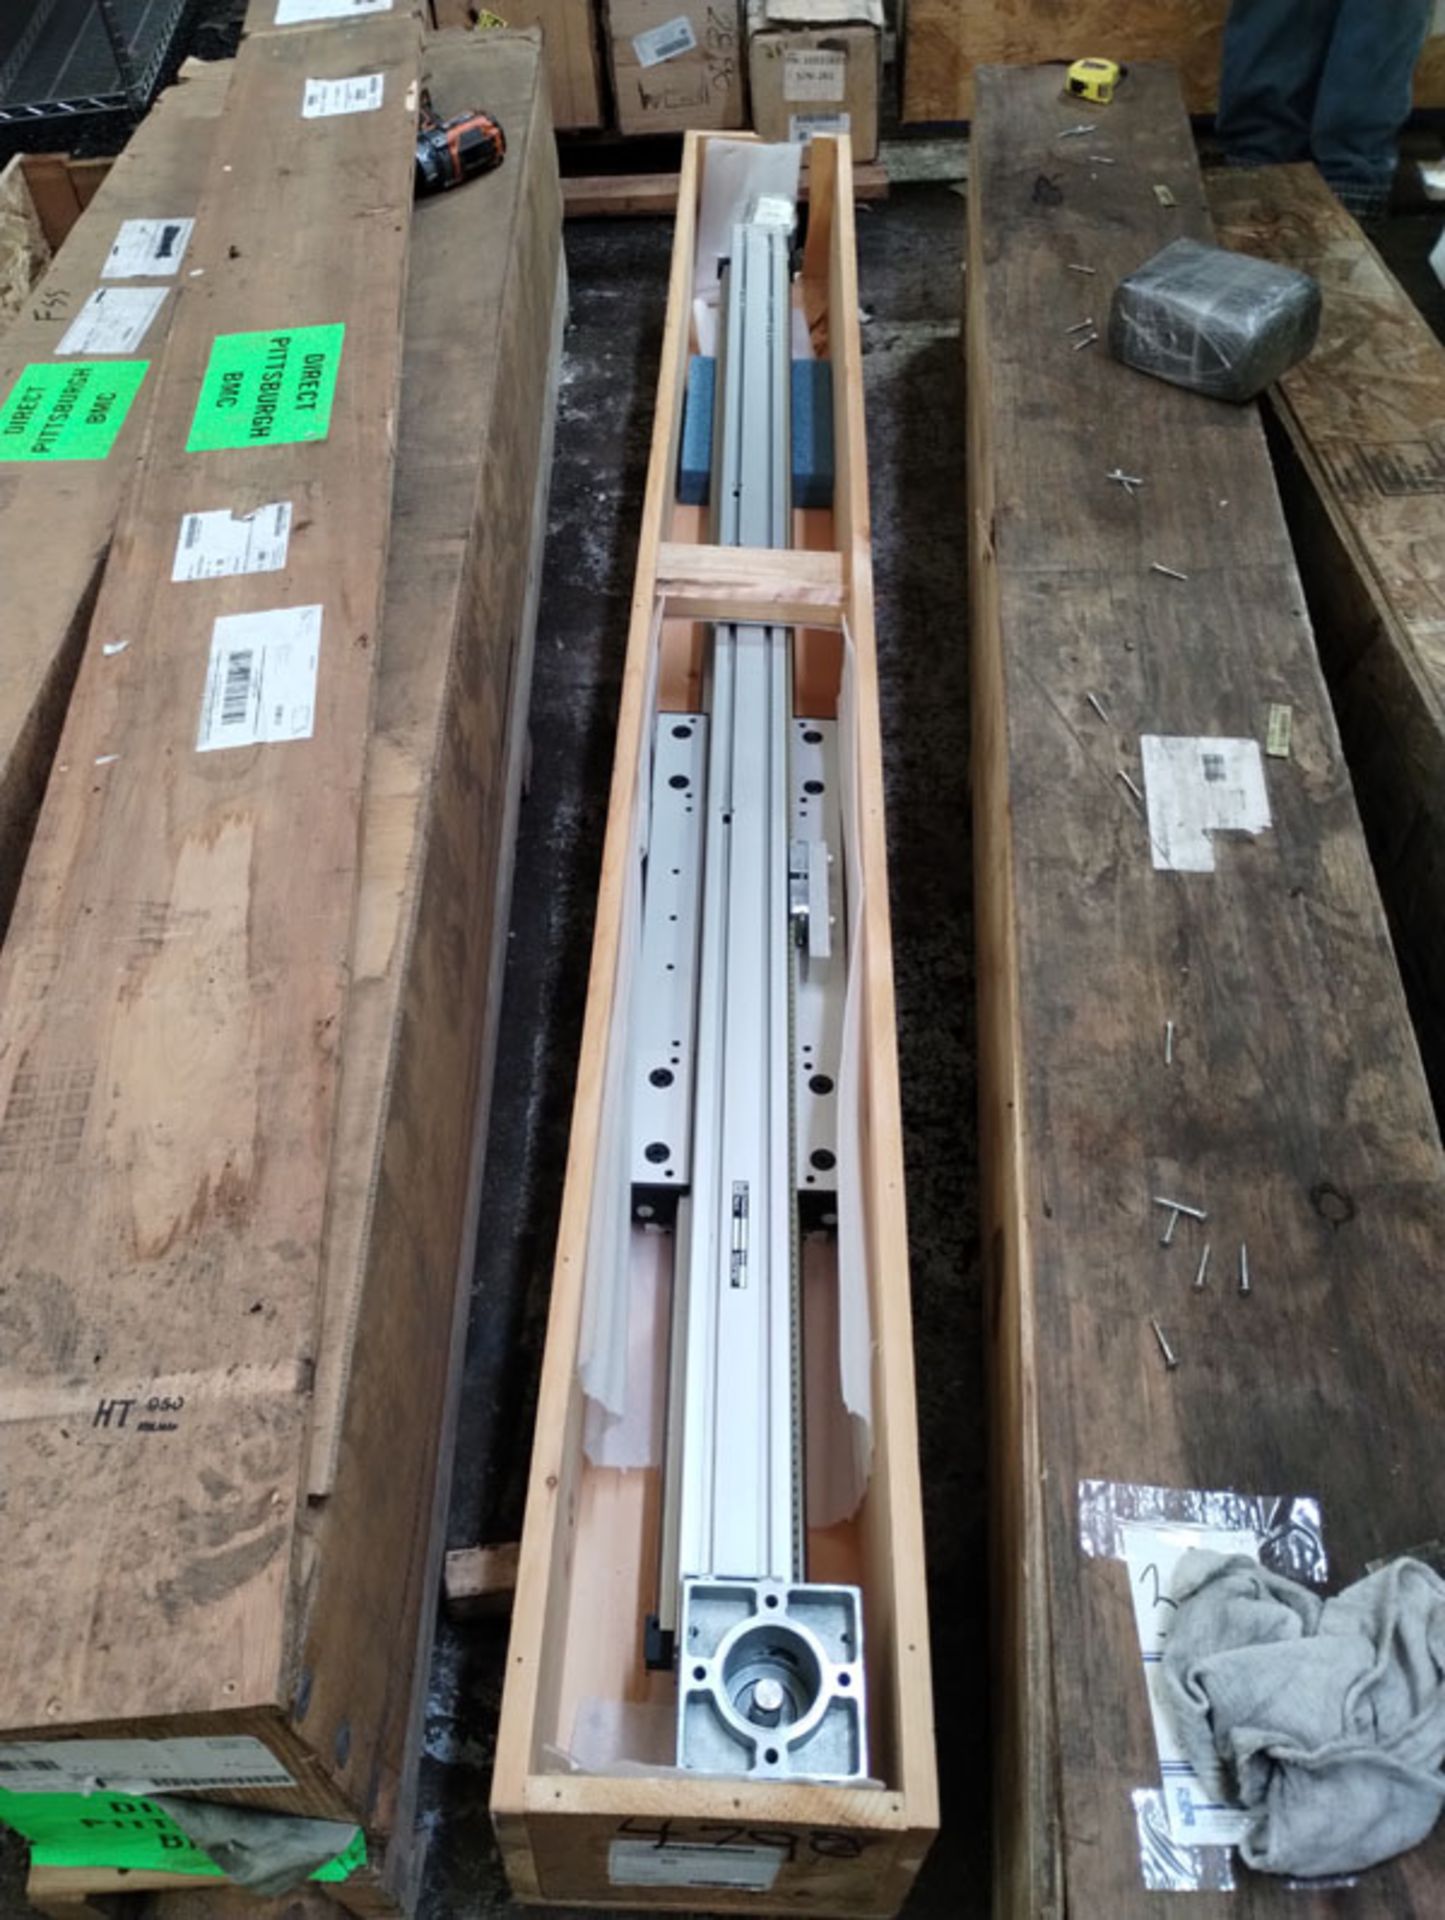 87" LINEAR ACTUATOR PART# 11237F01 -- Lot located at second location: 6800 Union ave. , Cleveland OH